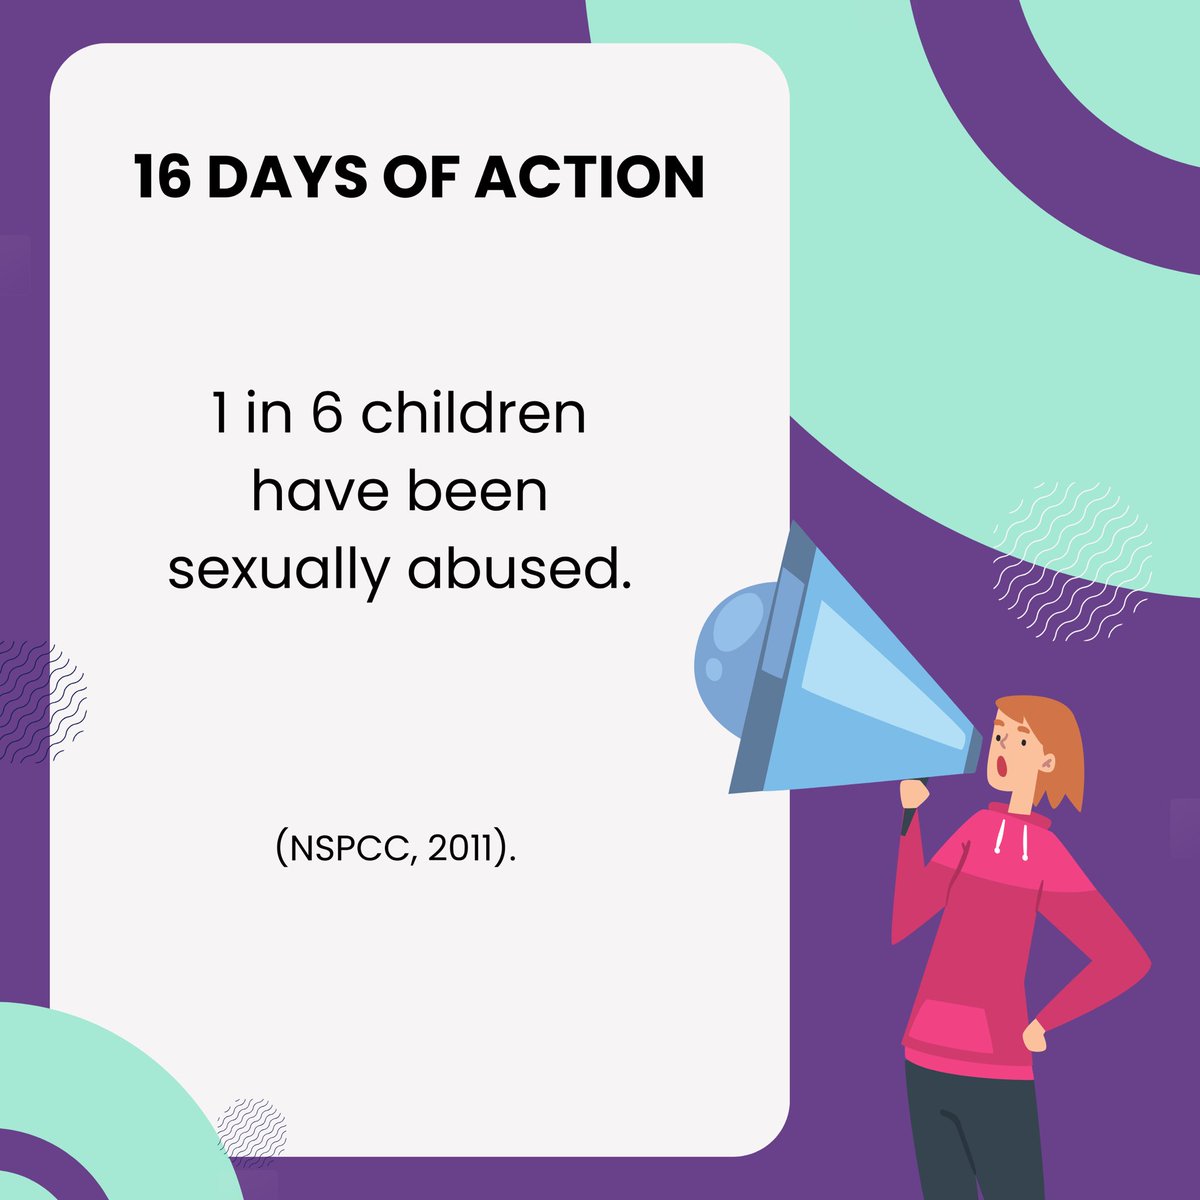 Day two of 16 days of action. 

#16daysofaction #violenceagainstwomenandgirls #internationaldayfortheeliminationofviolenceagainstwomen #endinggenderbasedviolence